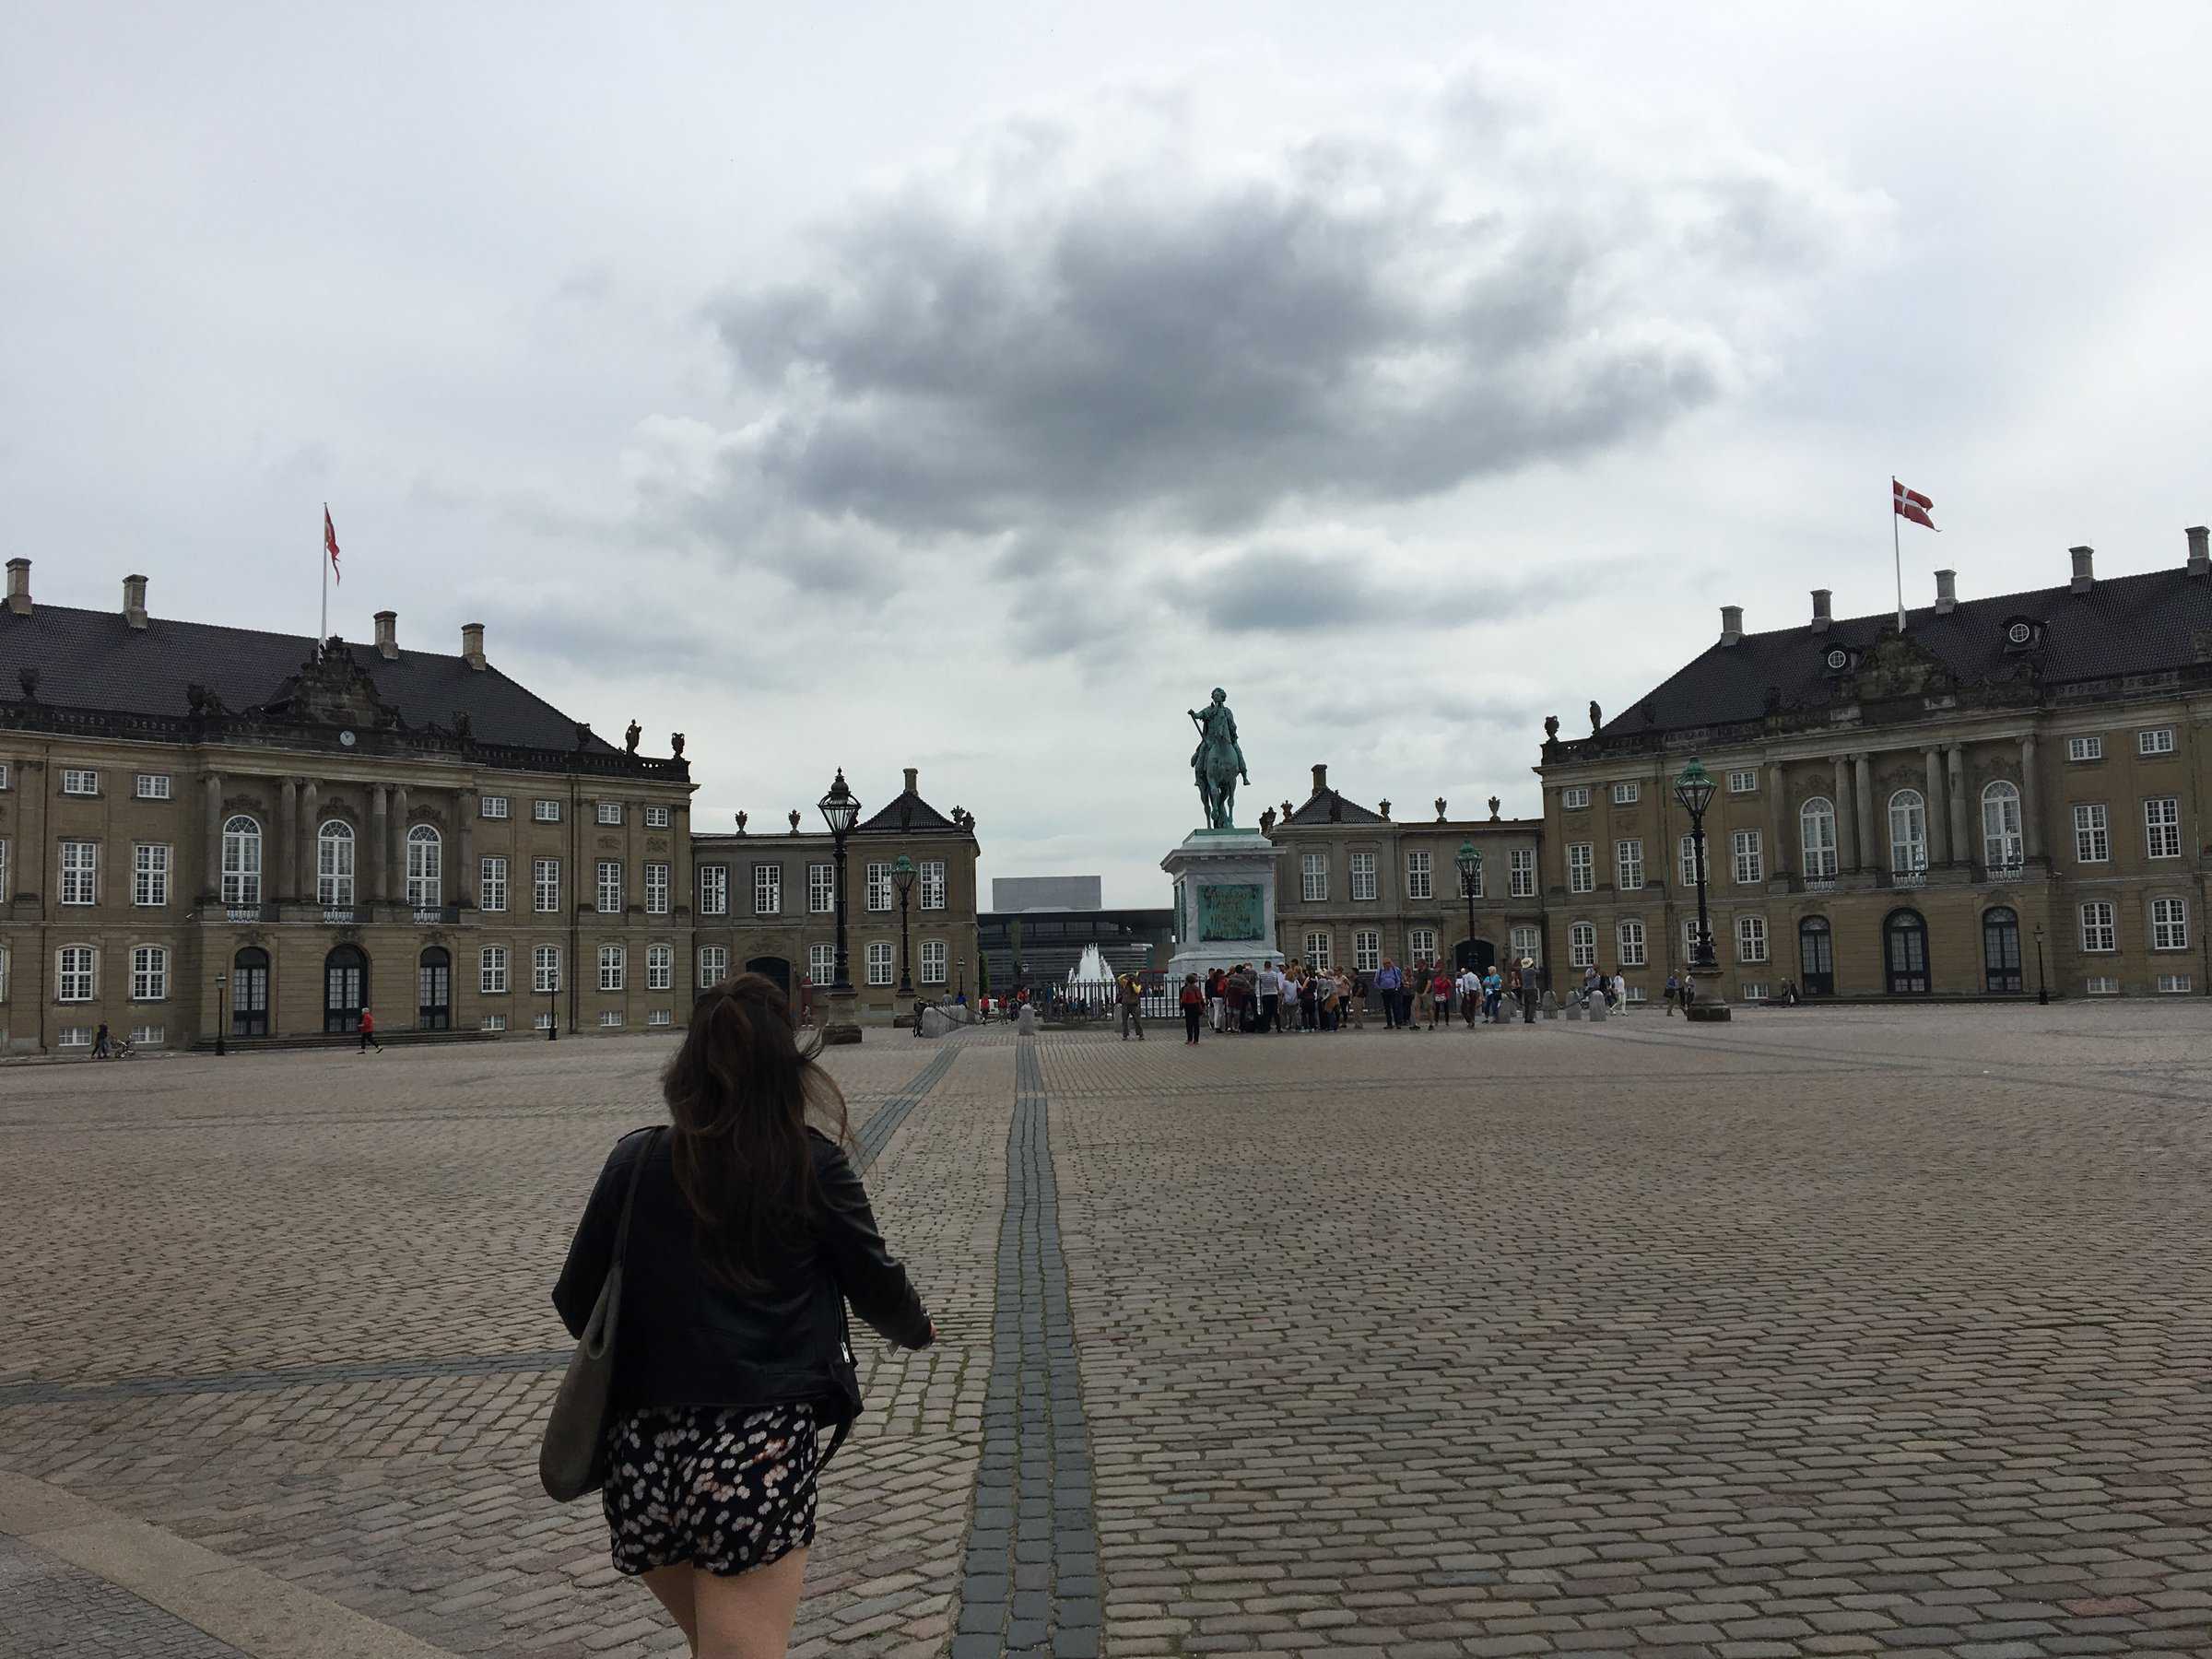 A woman walks towards the historic Amalienborg Palace in Copenhagen, Denmark, with its classical architecture and statue of King Frederik V on horseback in the center of the cobblestone courtyard, under a cloudy sky